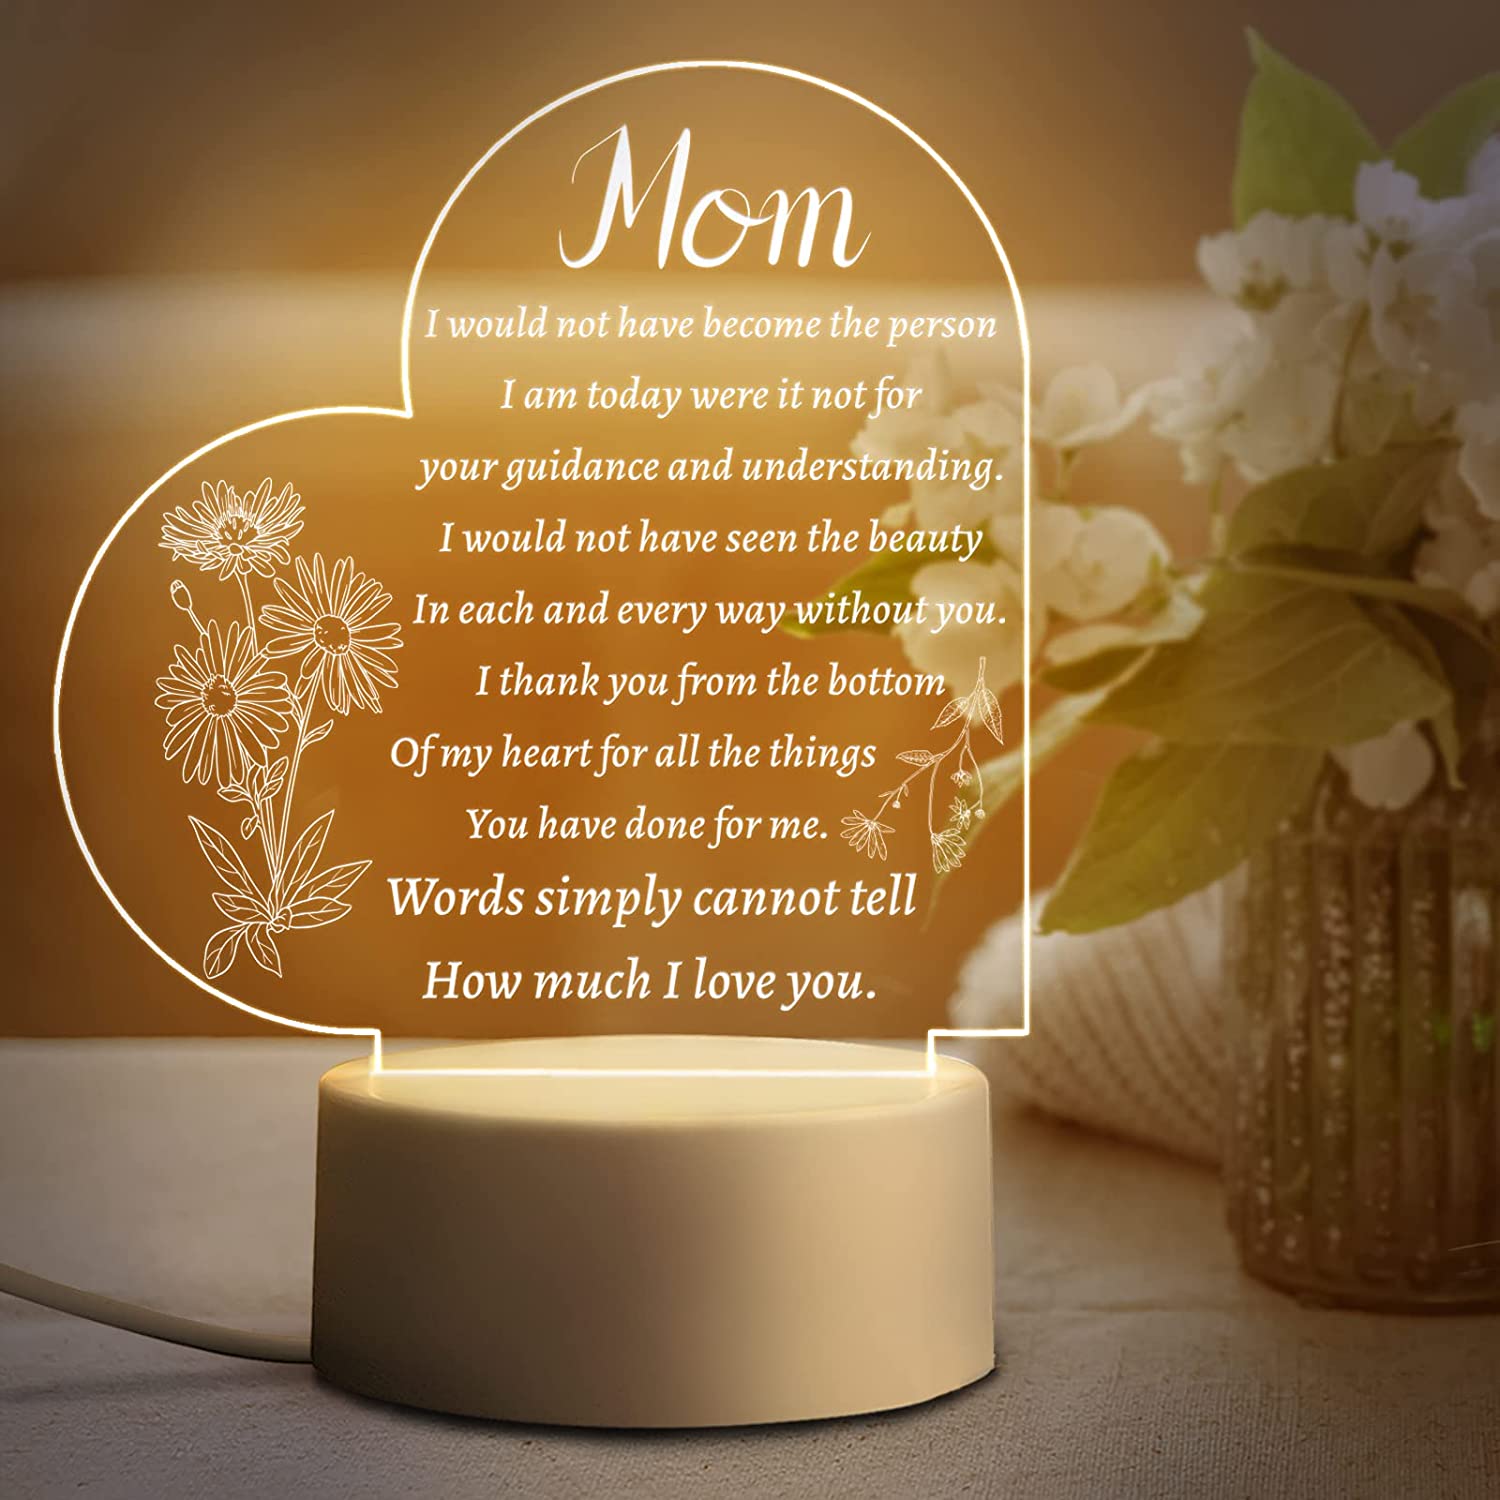 Mothers Day Gifts, Gifts for Mom, Birthday Gifts for Mom from Daughter Son,  Best Mom Ever Gifts for Thanksgiving, Christmas, Engraved Night Light Gifts  for Mom Who Has Everything, Bonus Mom, Stepmom 